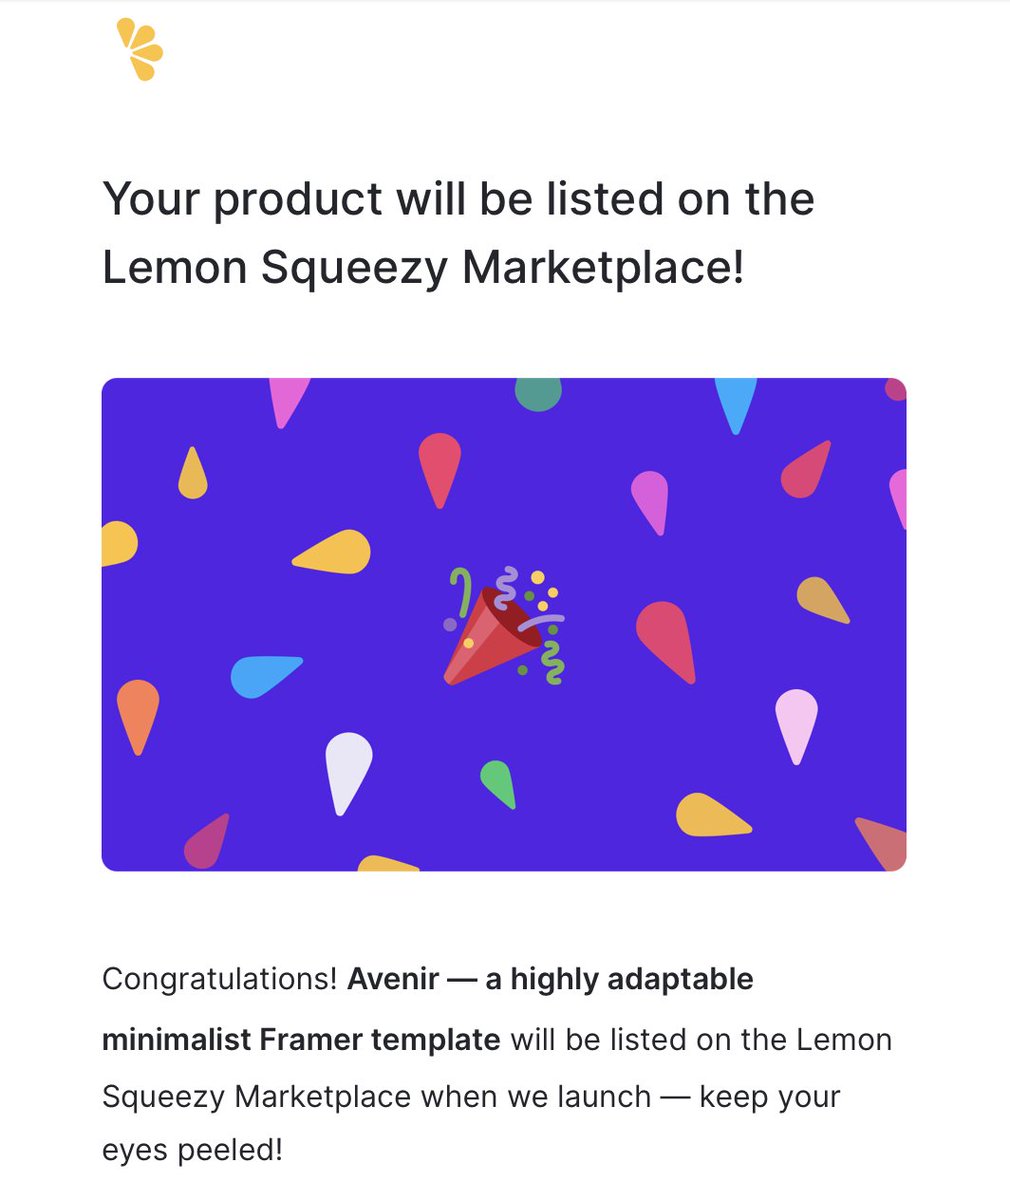 Good news! 🥳

After Artfolio, my Avenir @framer template is also accepted to be listed on @lmsqueezy marketplace! 🍋

🔗 avenir.framer.website

#buildinpublic